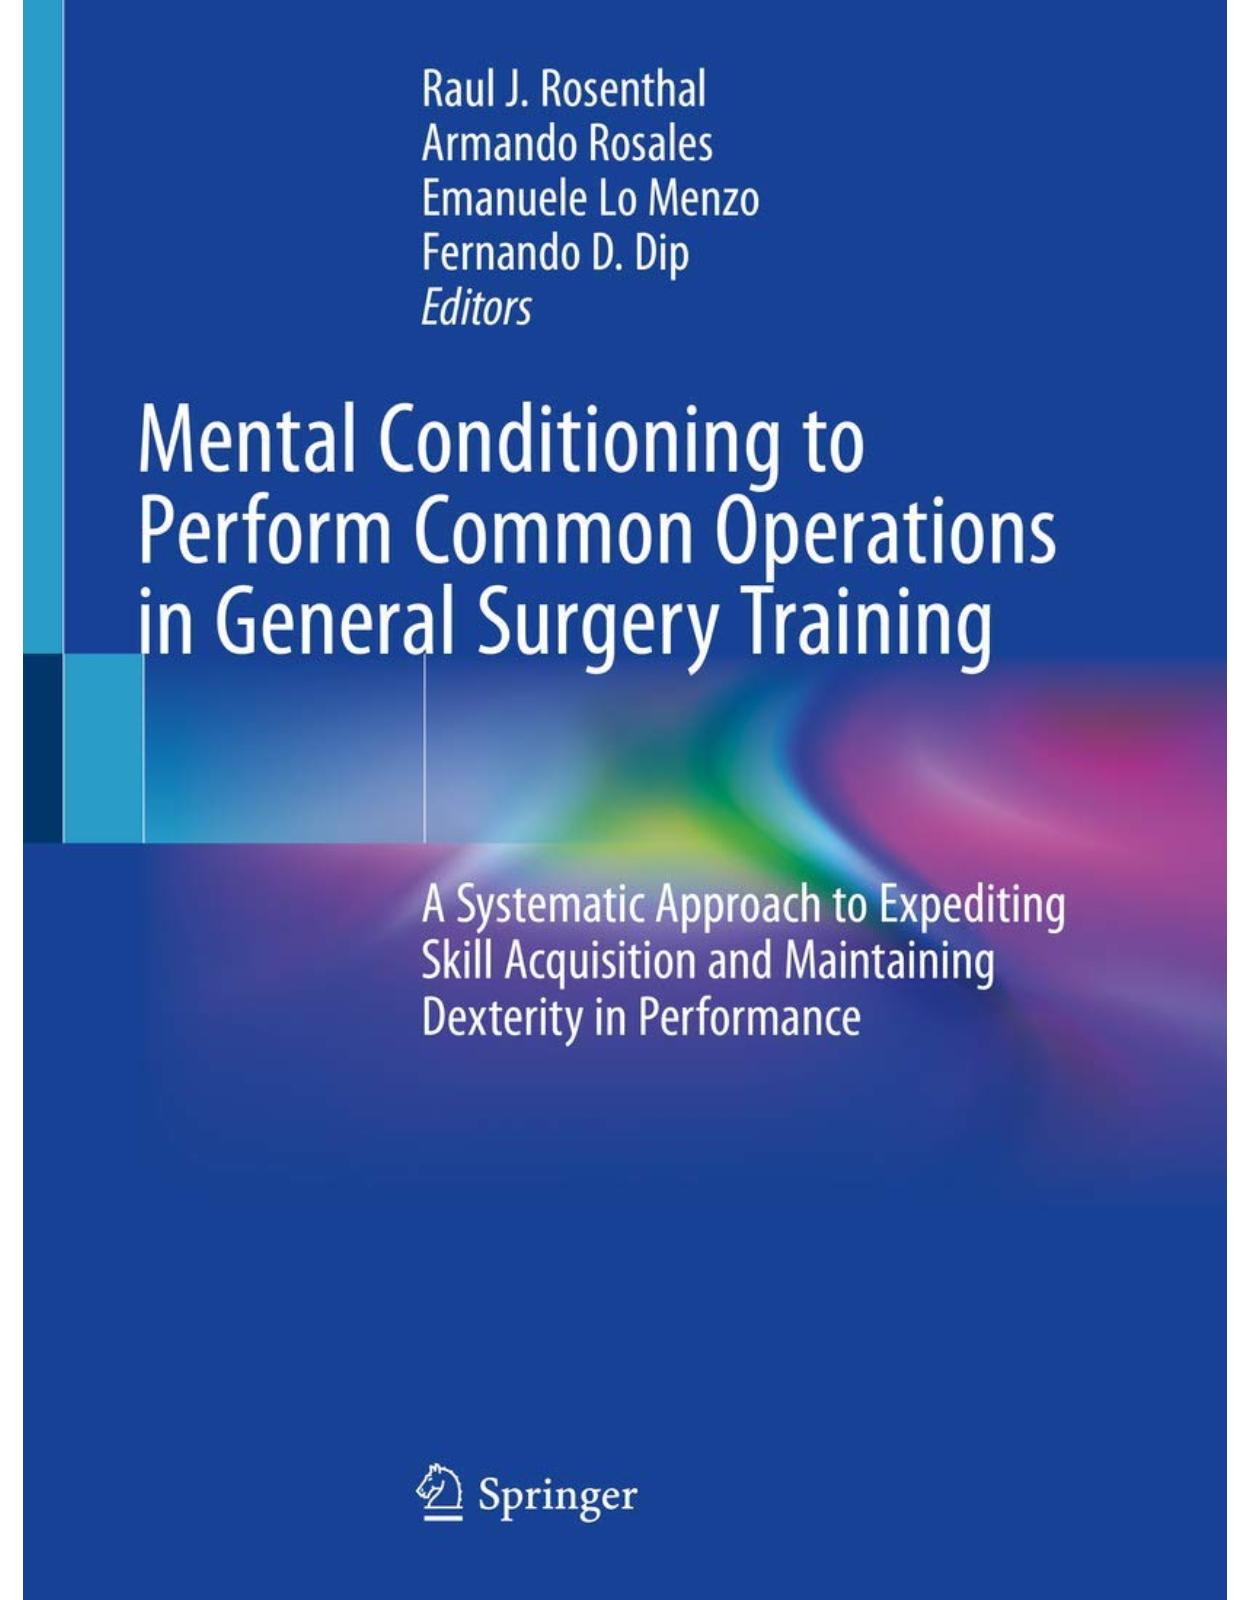 Mental Conditioning to Perform Common Operations in General Surgery Training: A Systematic Approach to Expediting Skill Acquisition and Maintaining Dexterity in Performance